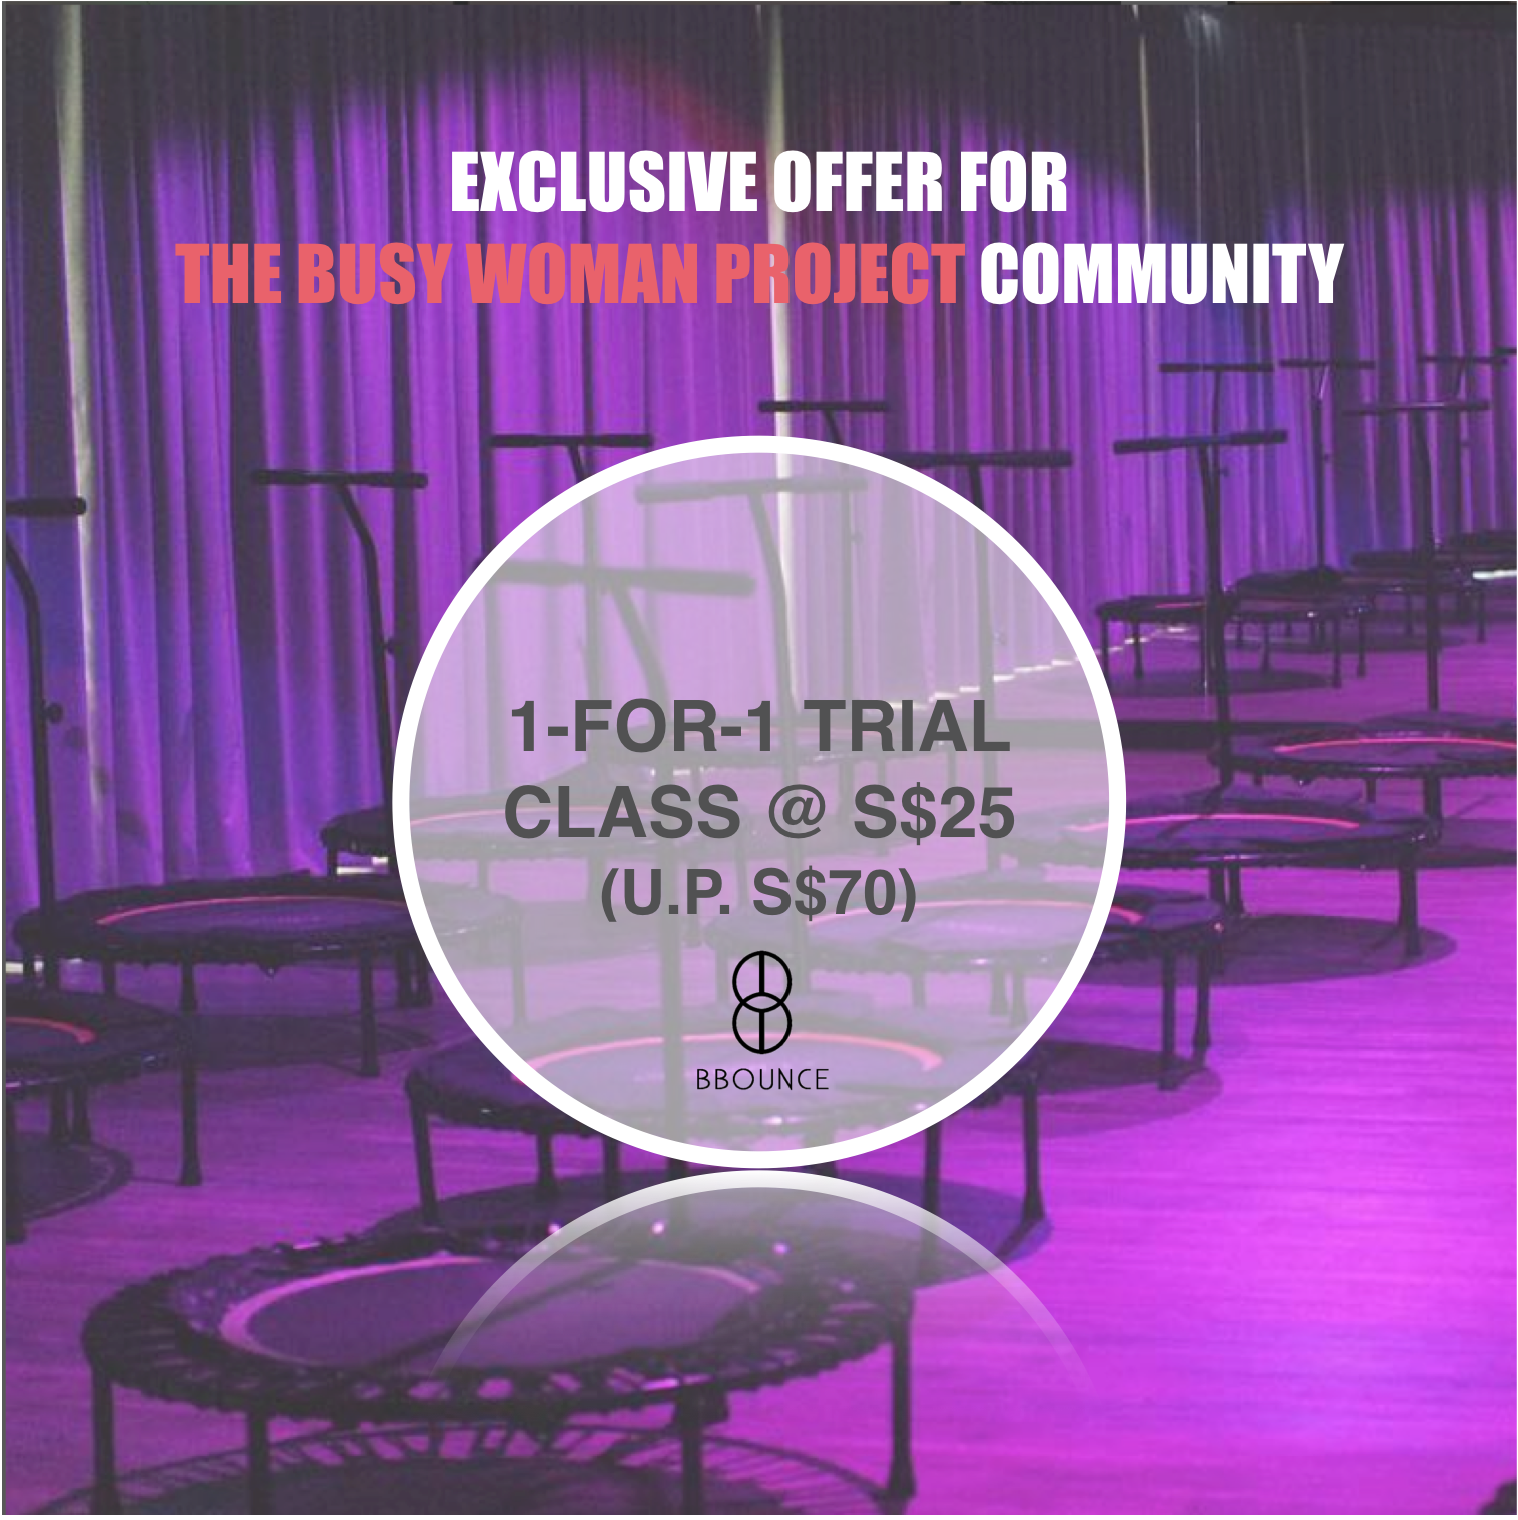 BBOUNCE Studio Singapore X #TEAMBUSYWOMAN: Exclusive 1-for-1 trial class limited offer @ S$25 (U.P. S$70)